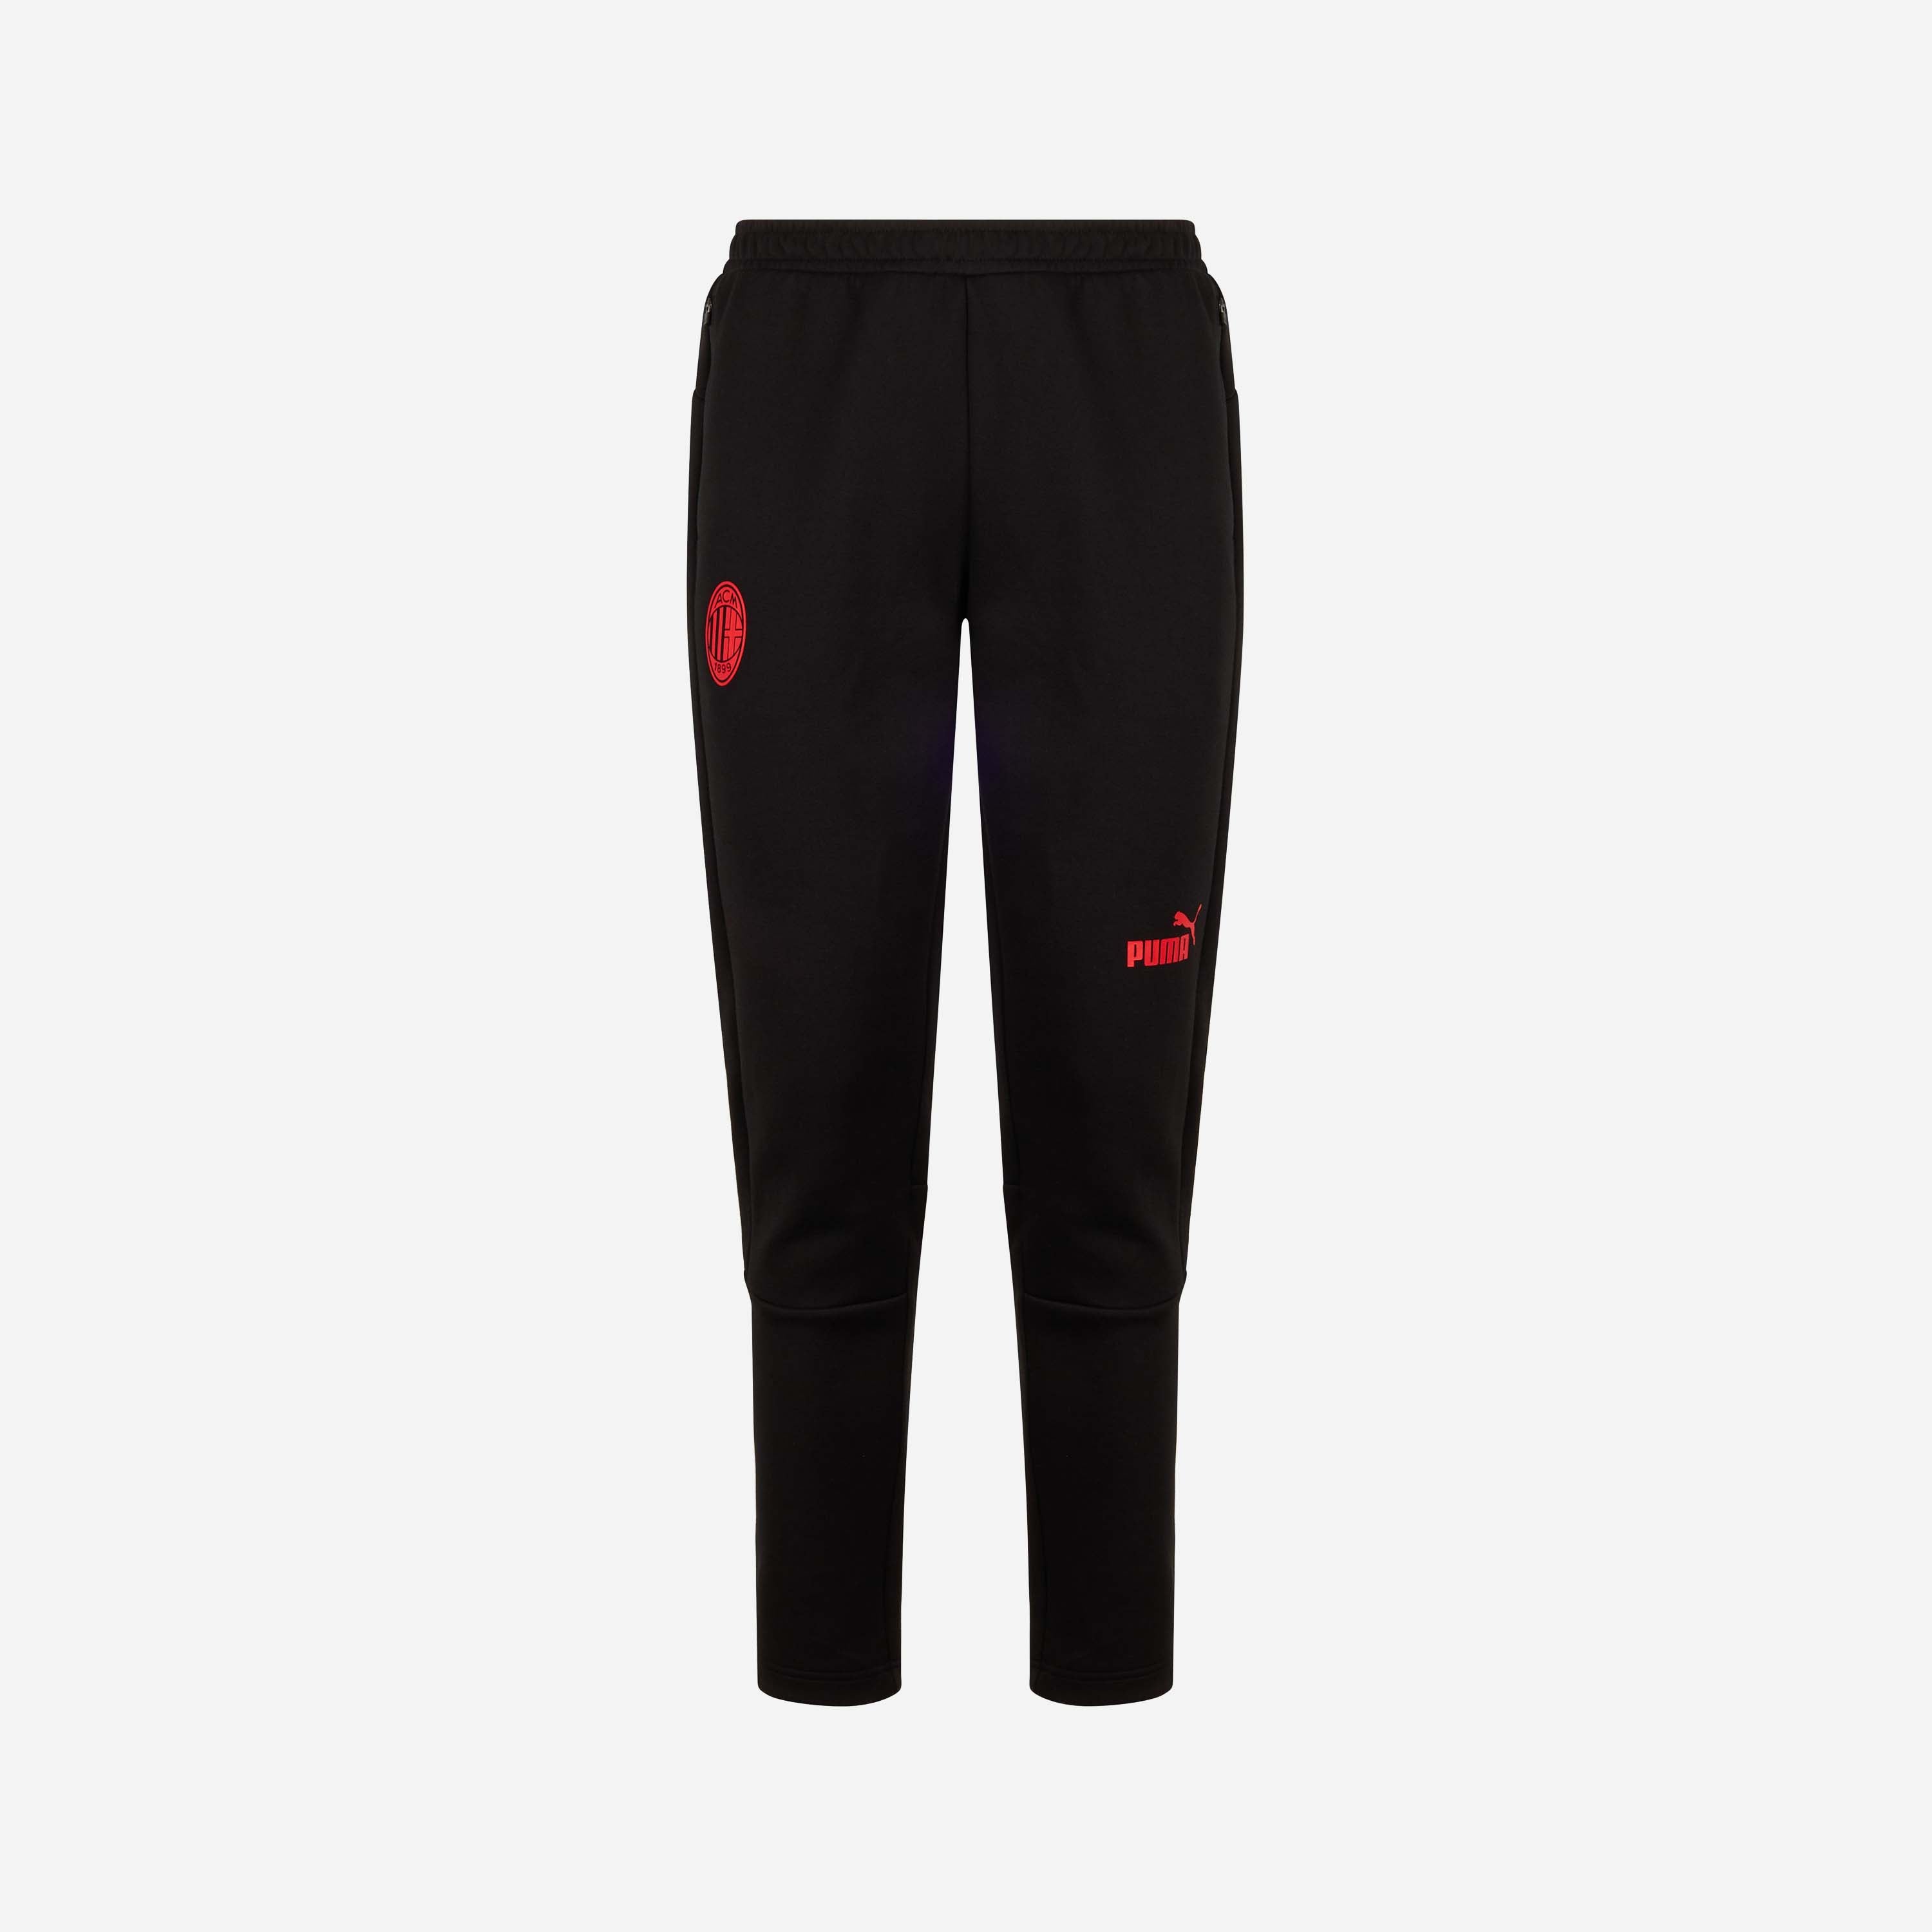 MILAN CASUALS 2022/23 PANTS WITH POCKETS | AC Milan Store